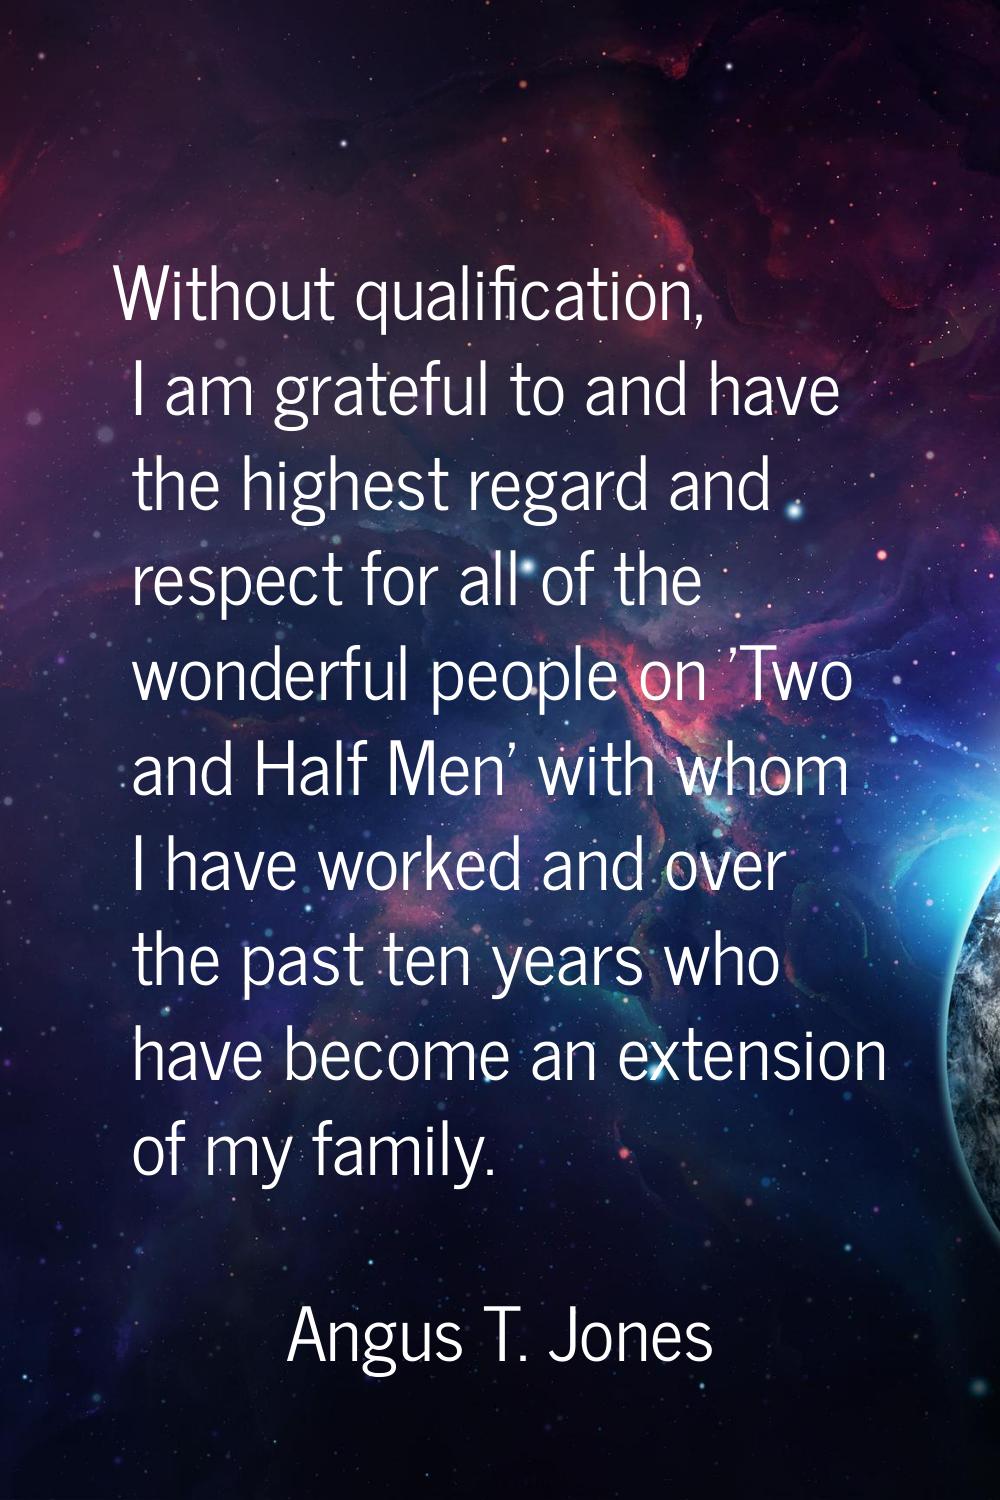 Without qualification, I am grateful to and have the highest regard and respect for all of the wond